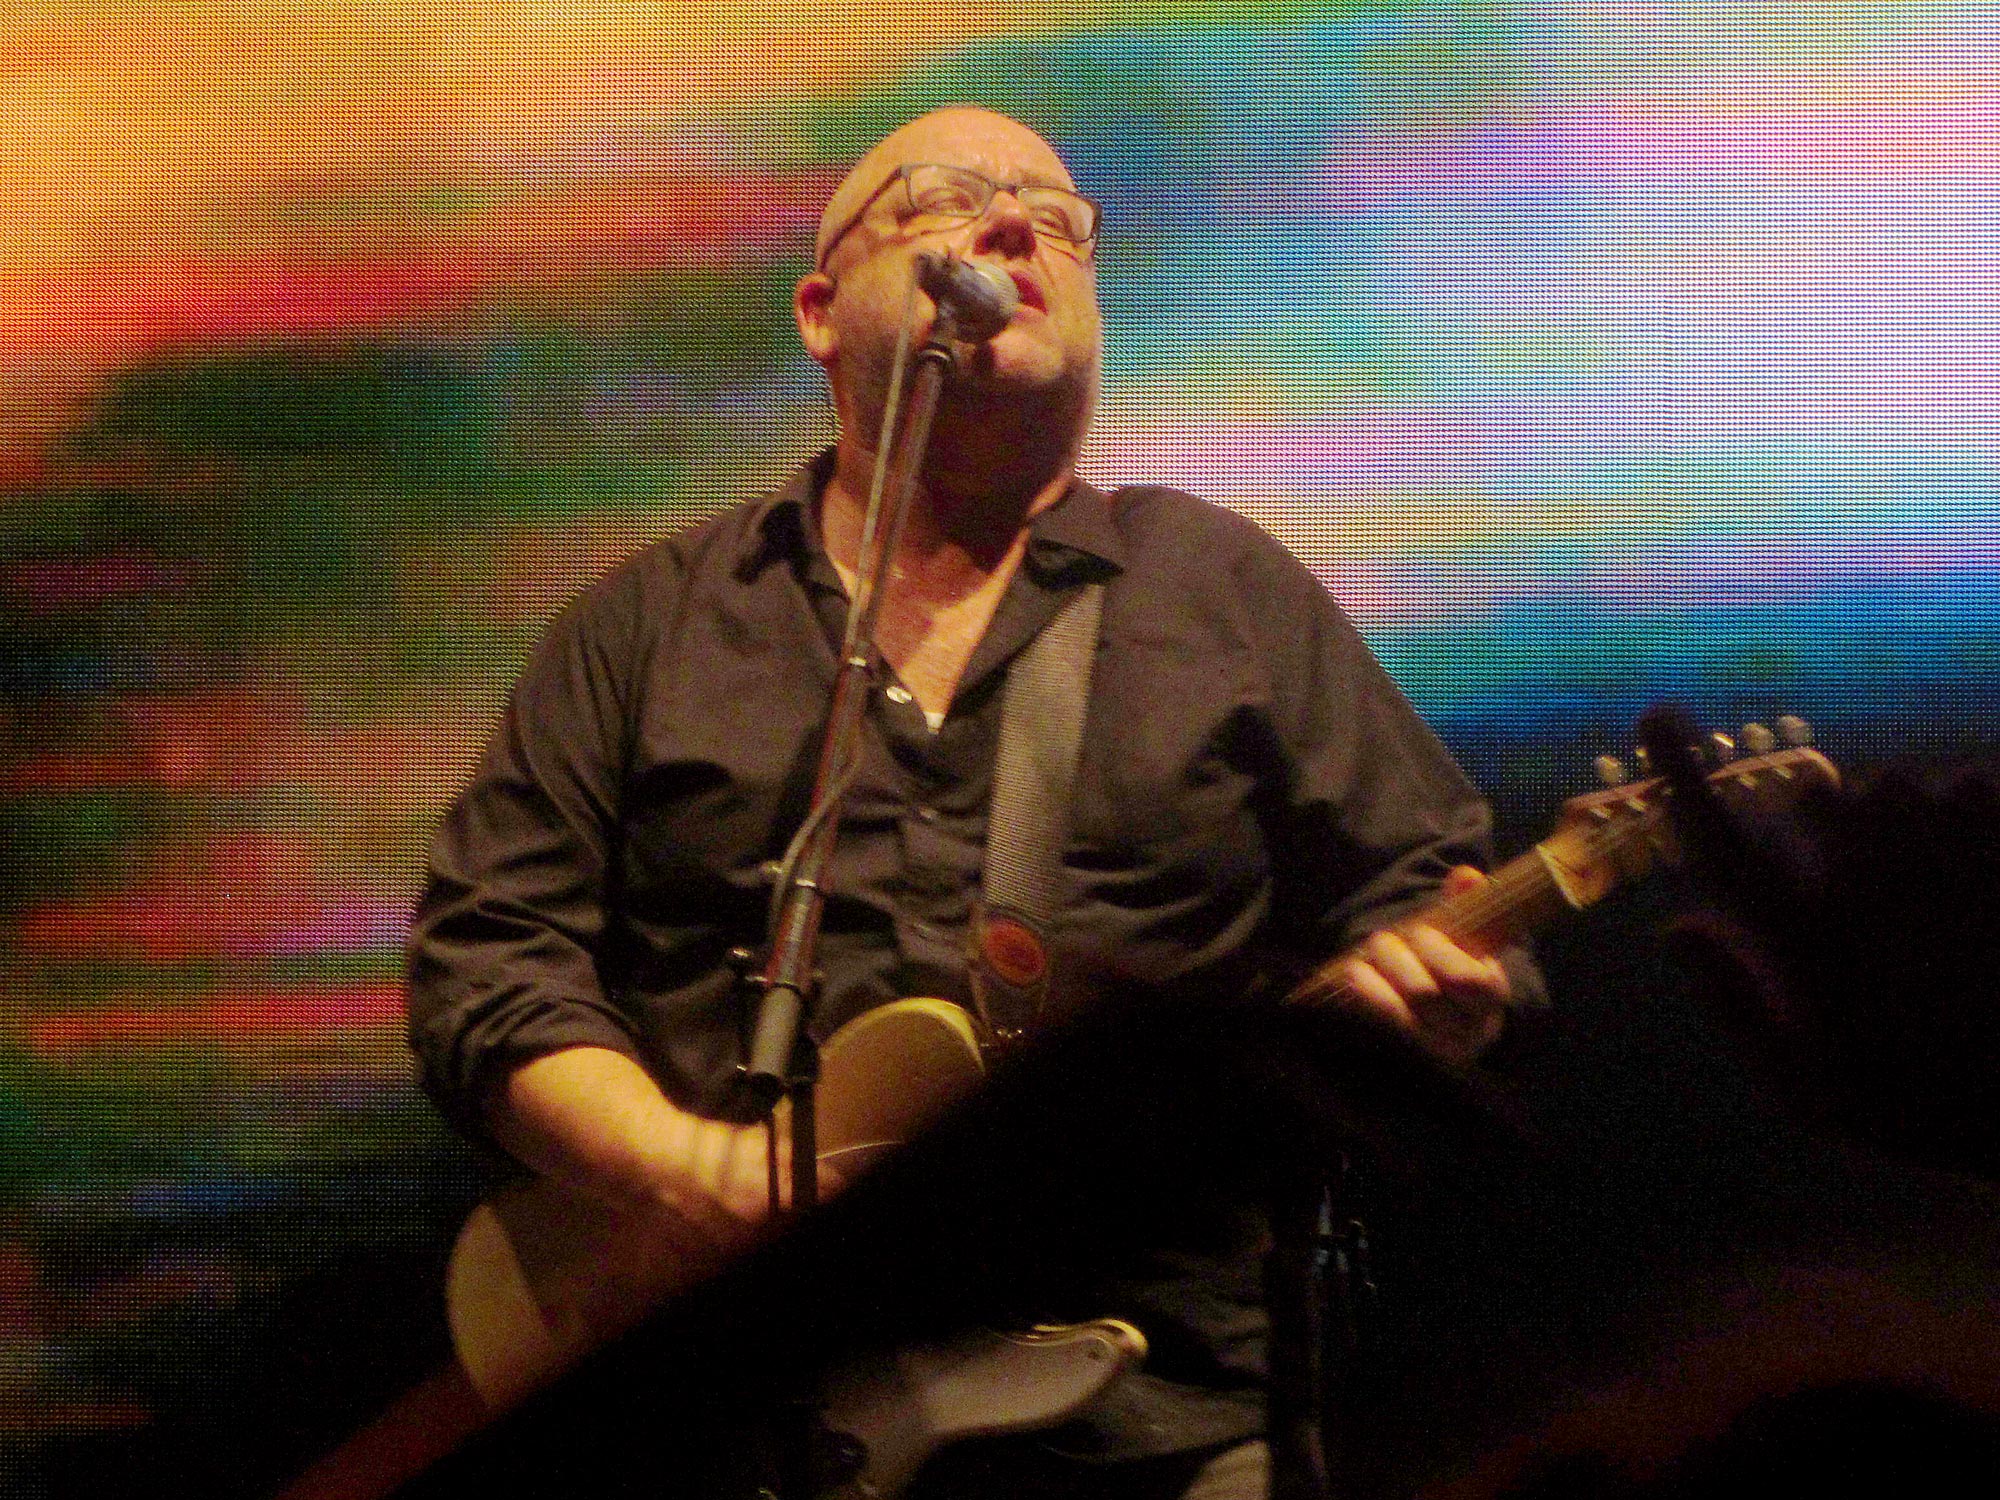 A bald man in glasses sings into a microphone whilst playing guitar. Behind him is a multicolour digital screen.